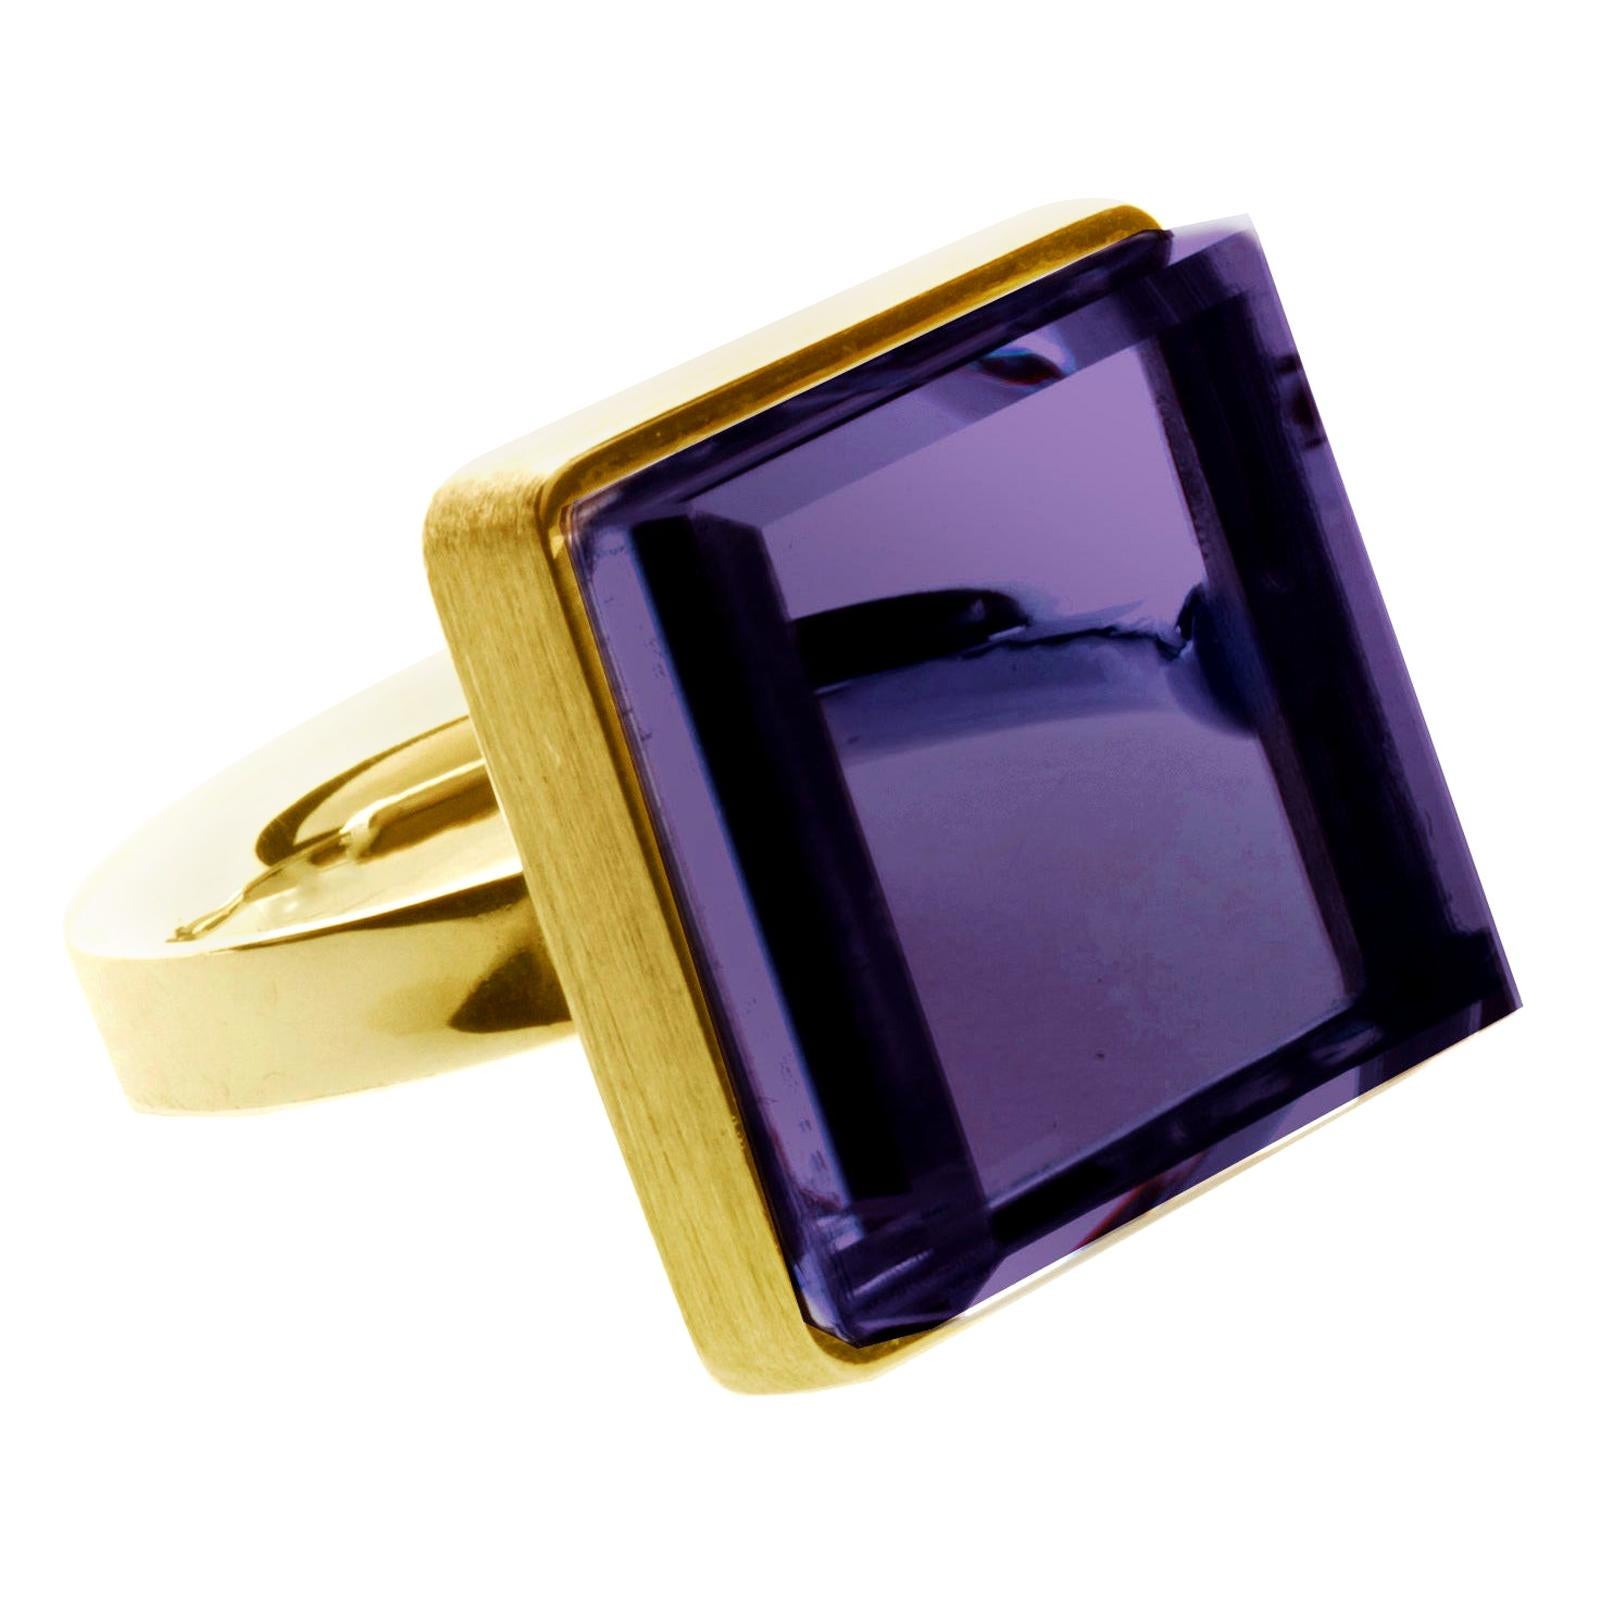 This contemporary jewellery ring, featuring a 15x15x8 mm dark grown amethyst, is crafted in 18 karat yellow gold and has been featured in Harper's Bazaar and Vogue UA. It can be ordered with lighter natural amethyst for the same price.

Reflecting